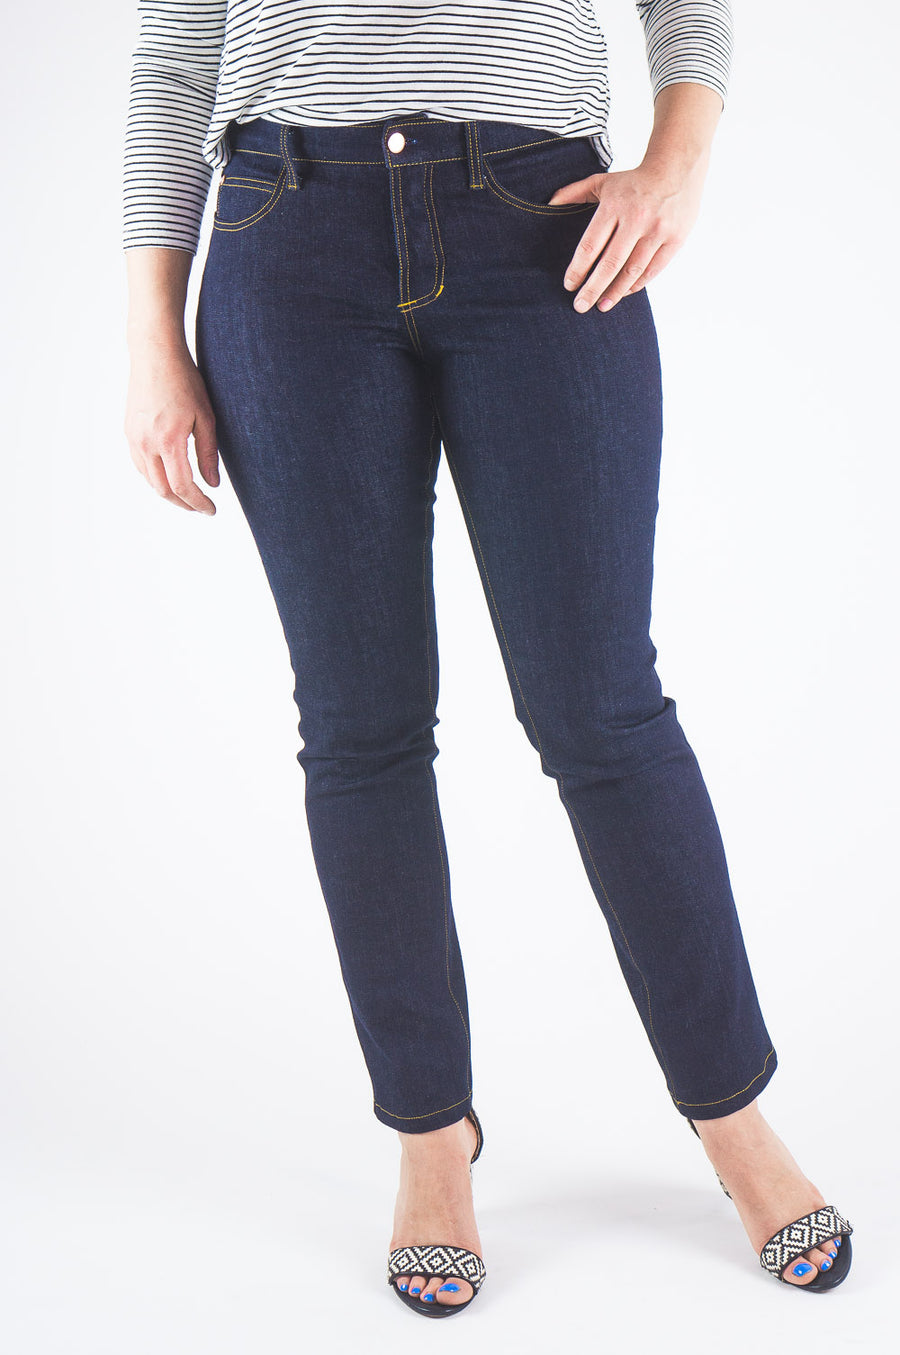 Ginger Mid-rise Skinny Jean Pattern // Jeans sewing pattern // Closet Core Patterns